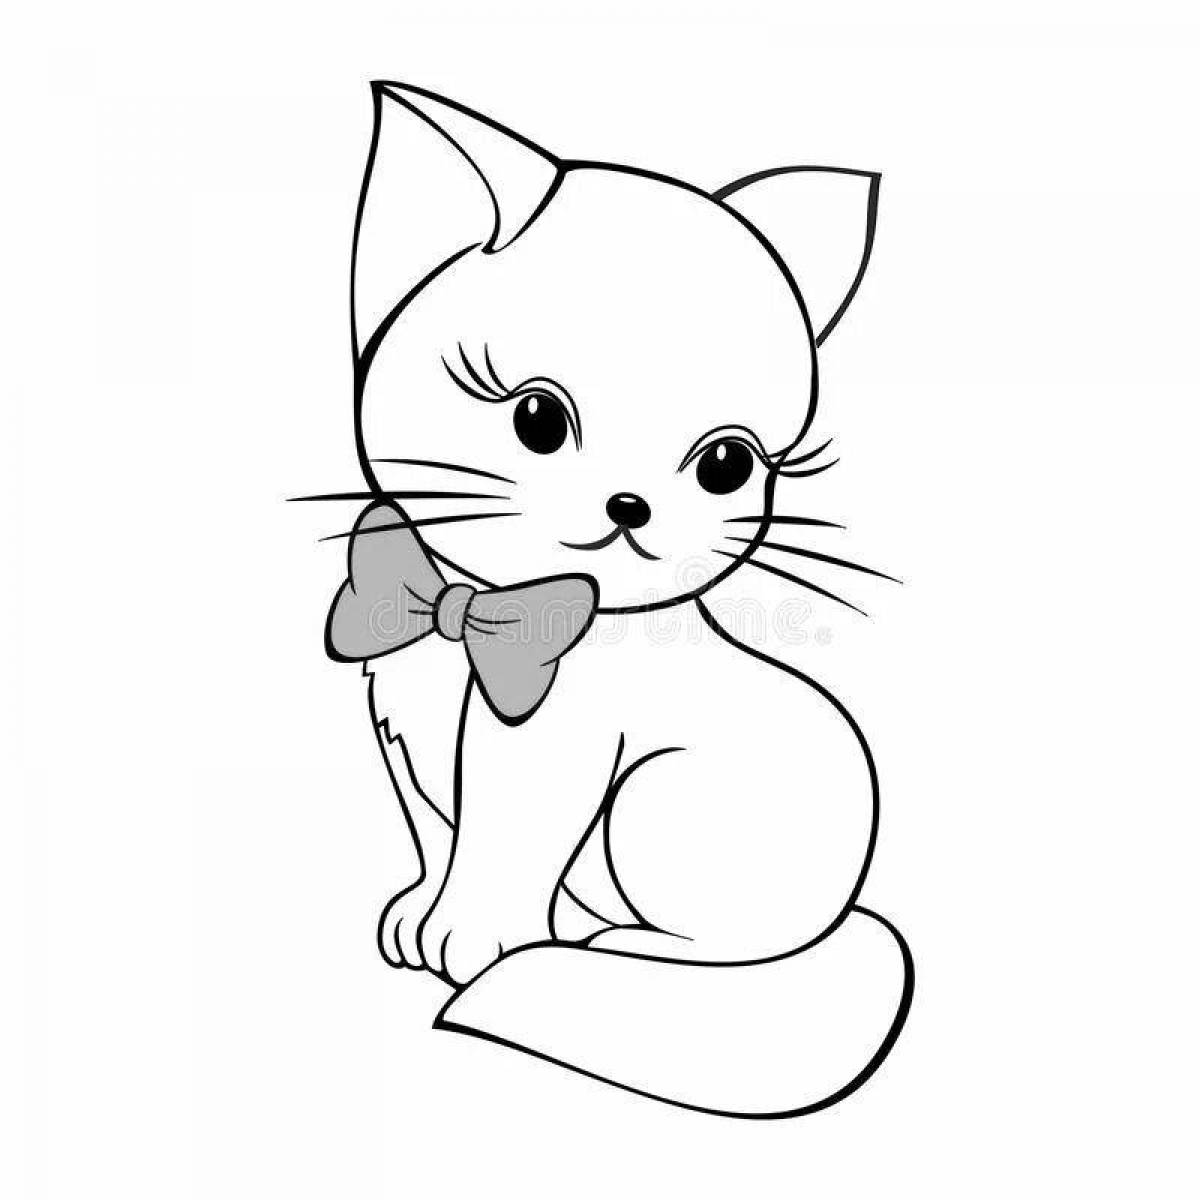 Coloring page playful kitten with a bow